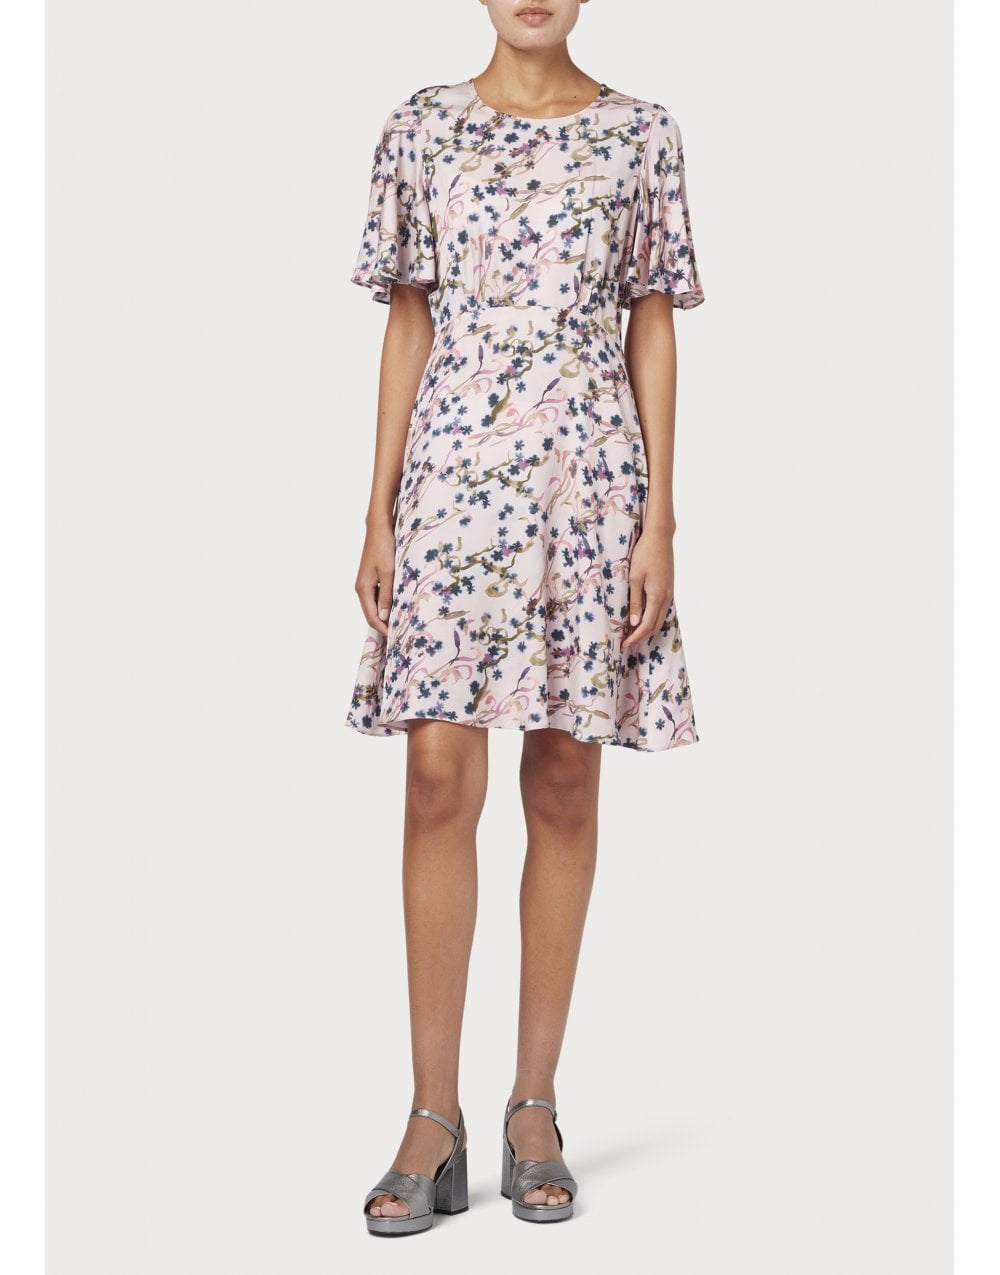 Paul Smith Small Floral Print Fit & Flare Dress Size: 14, Col: Pin